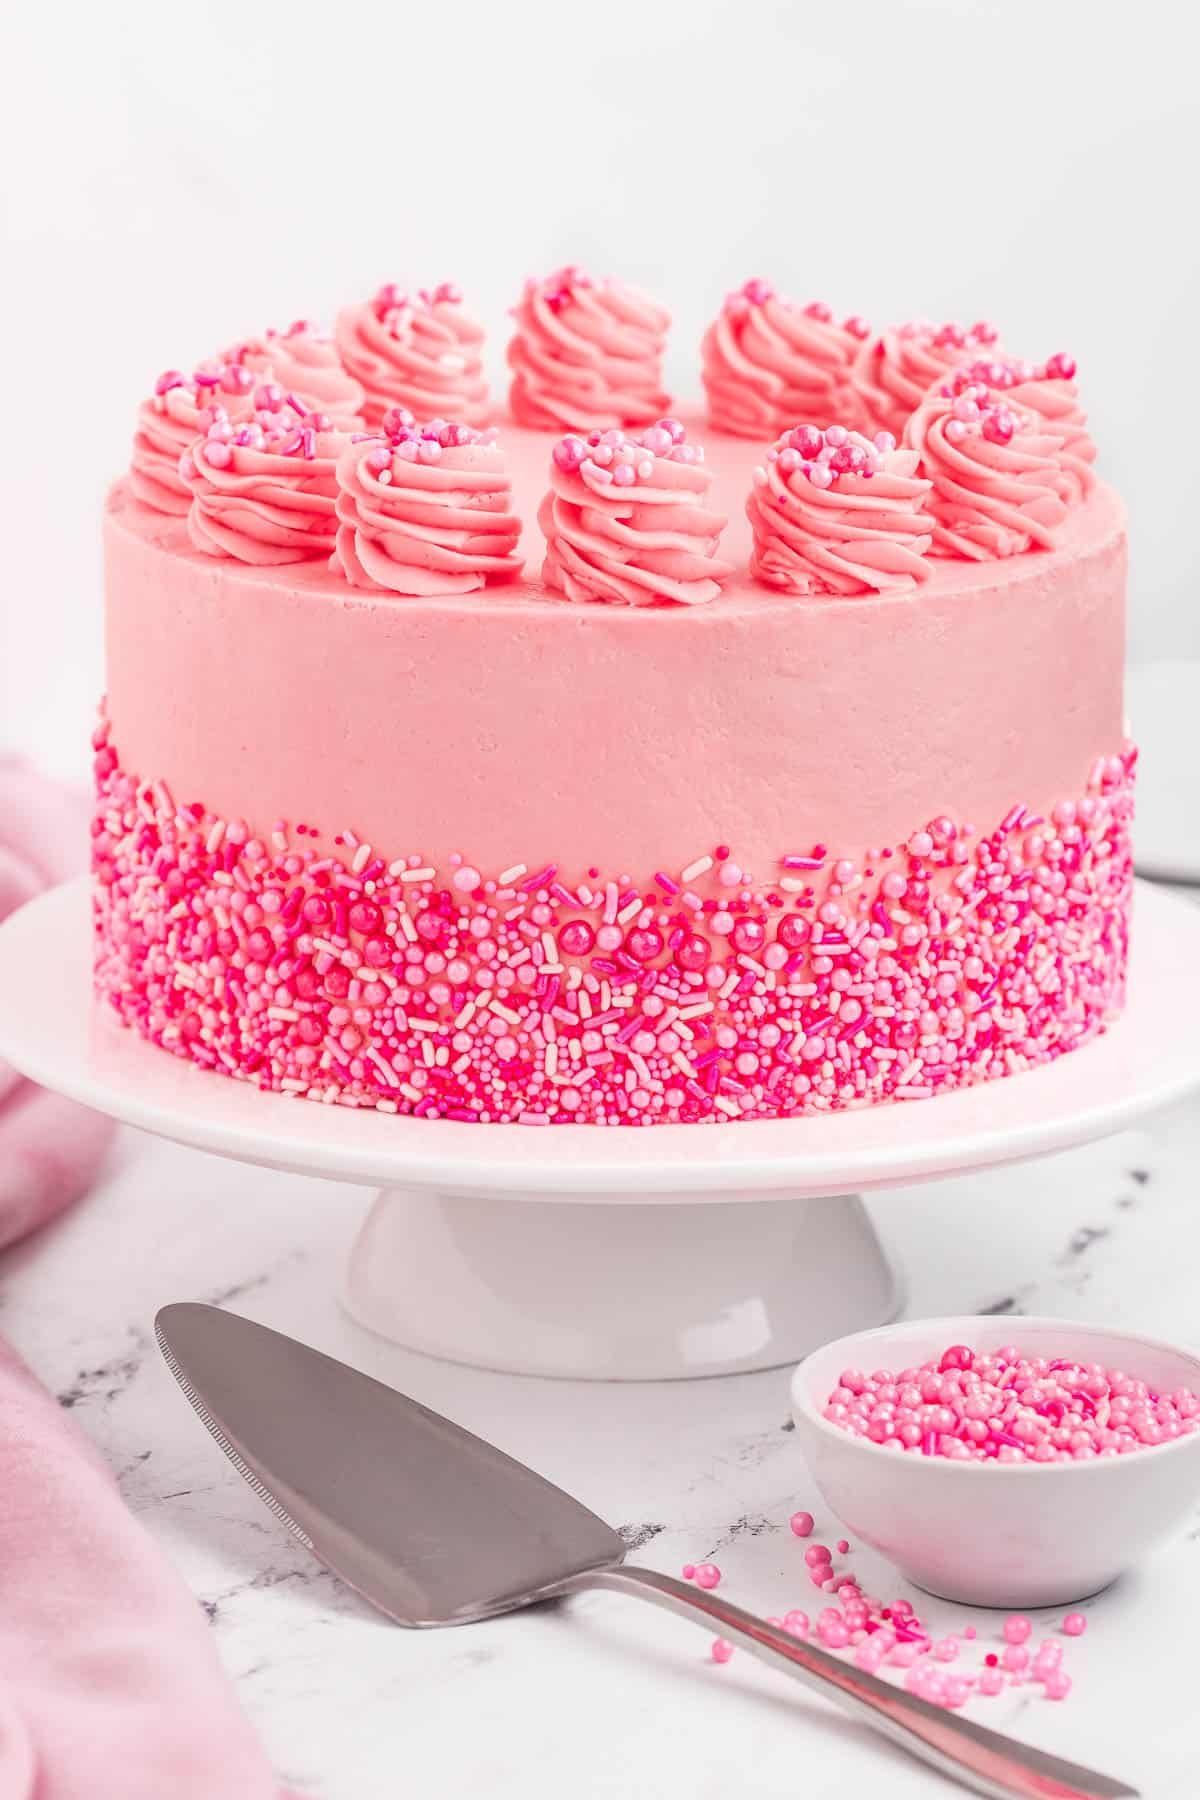 A pink velvet cake on a pedestal decorated with sprinkles.